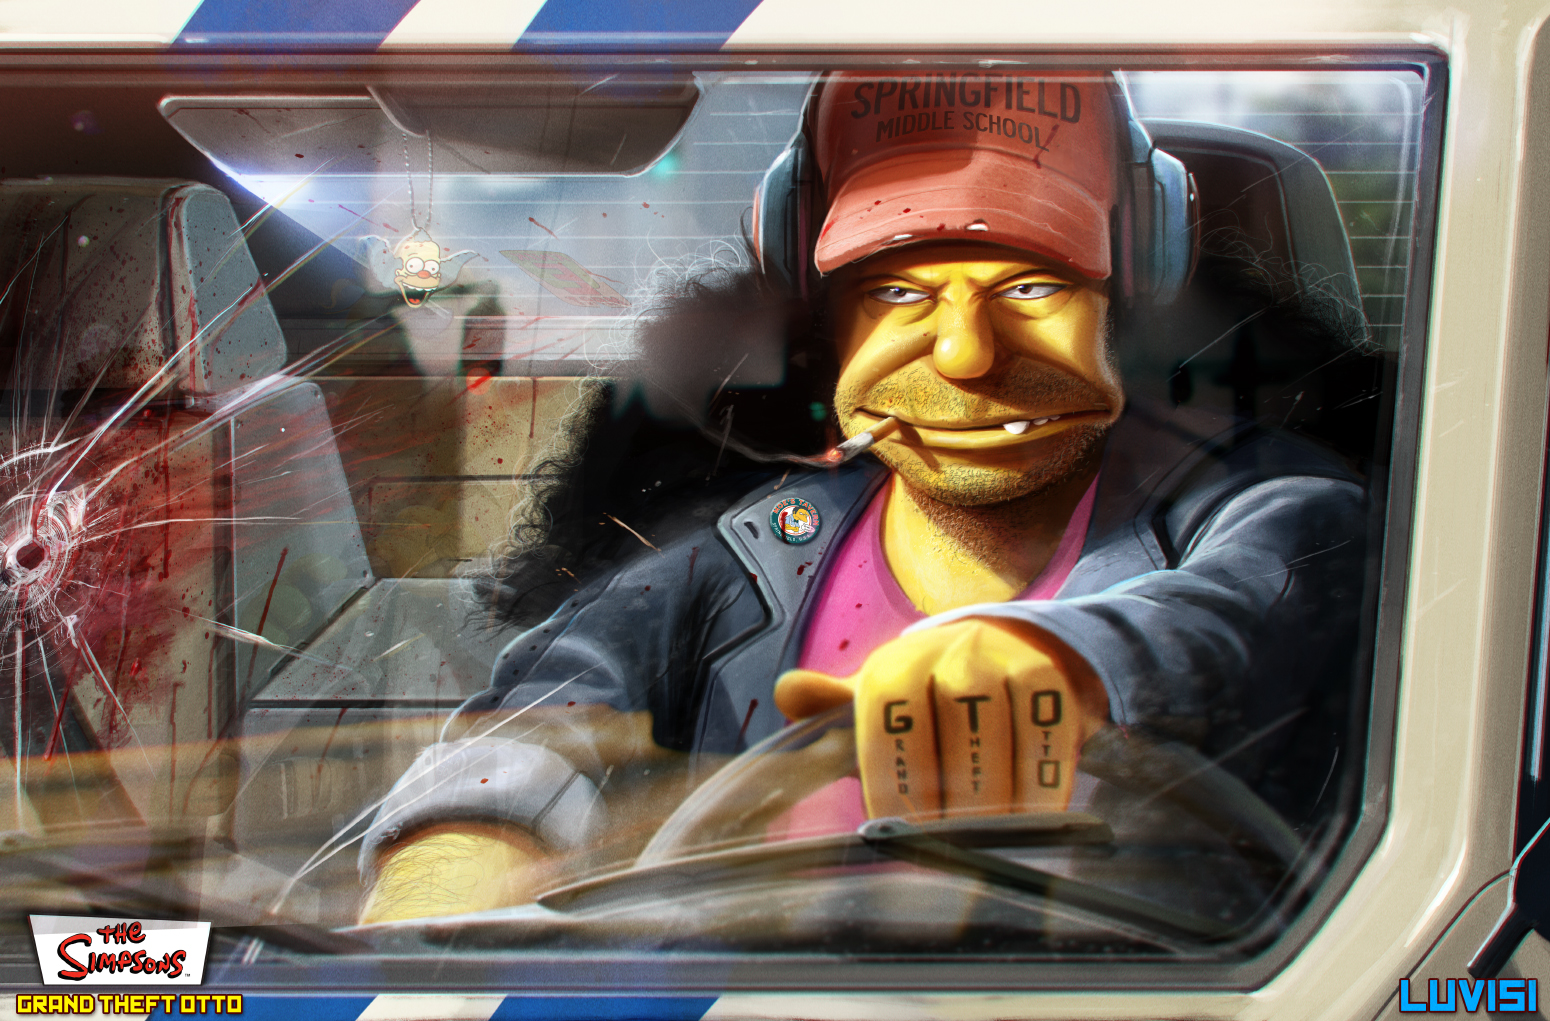 grand_theft_otto___part_1_by_danluvisiar